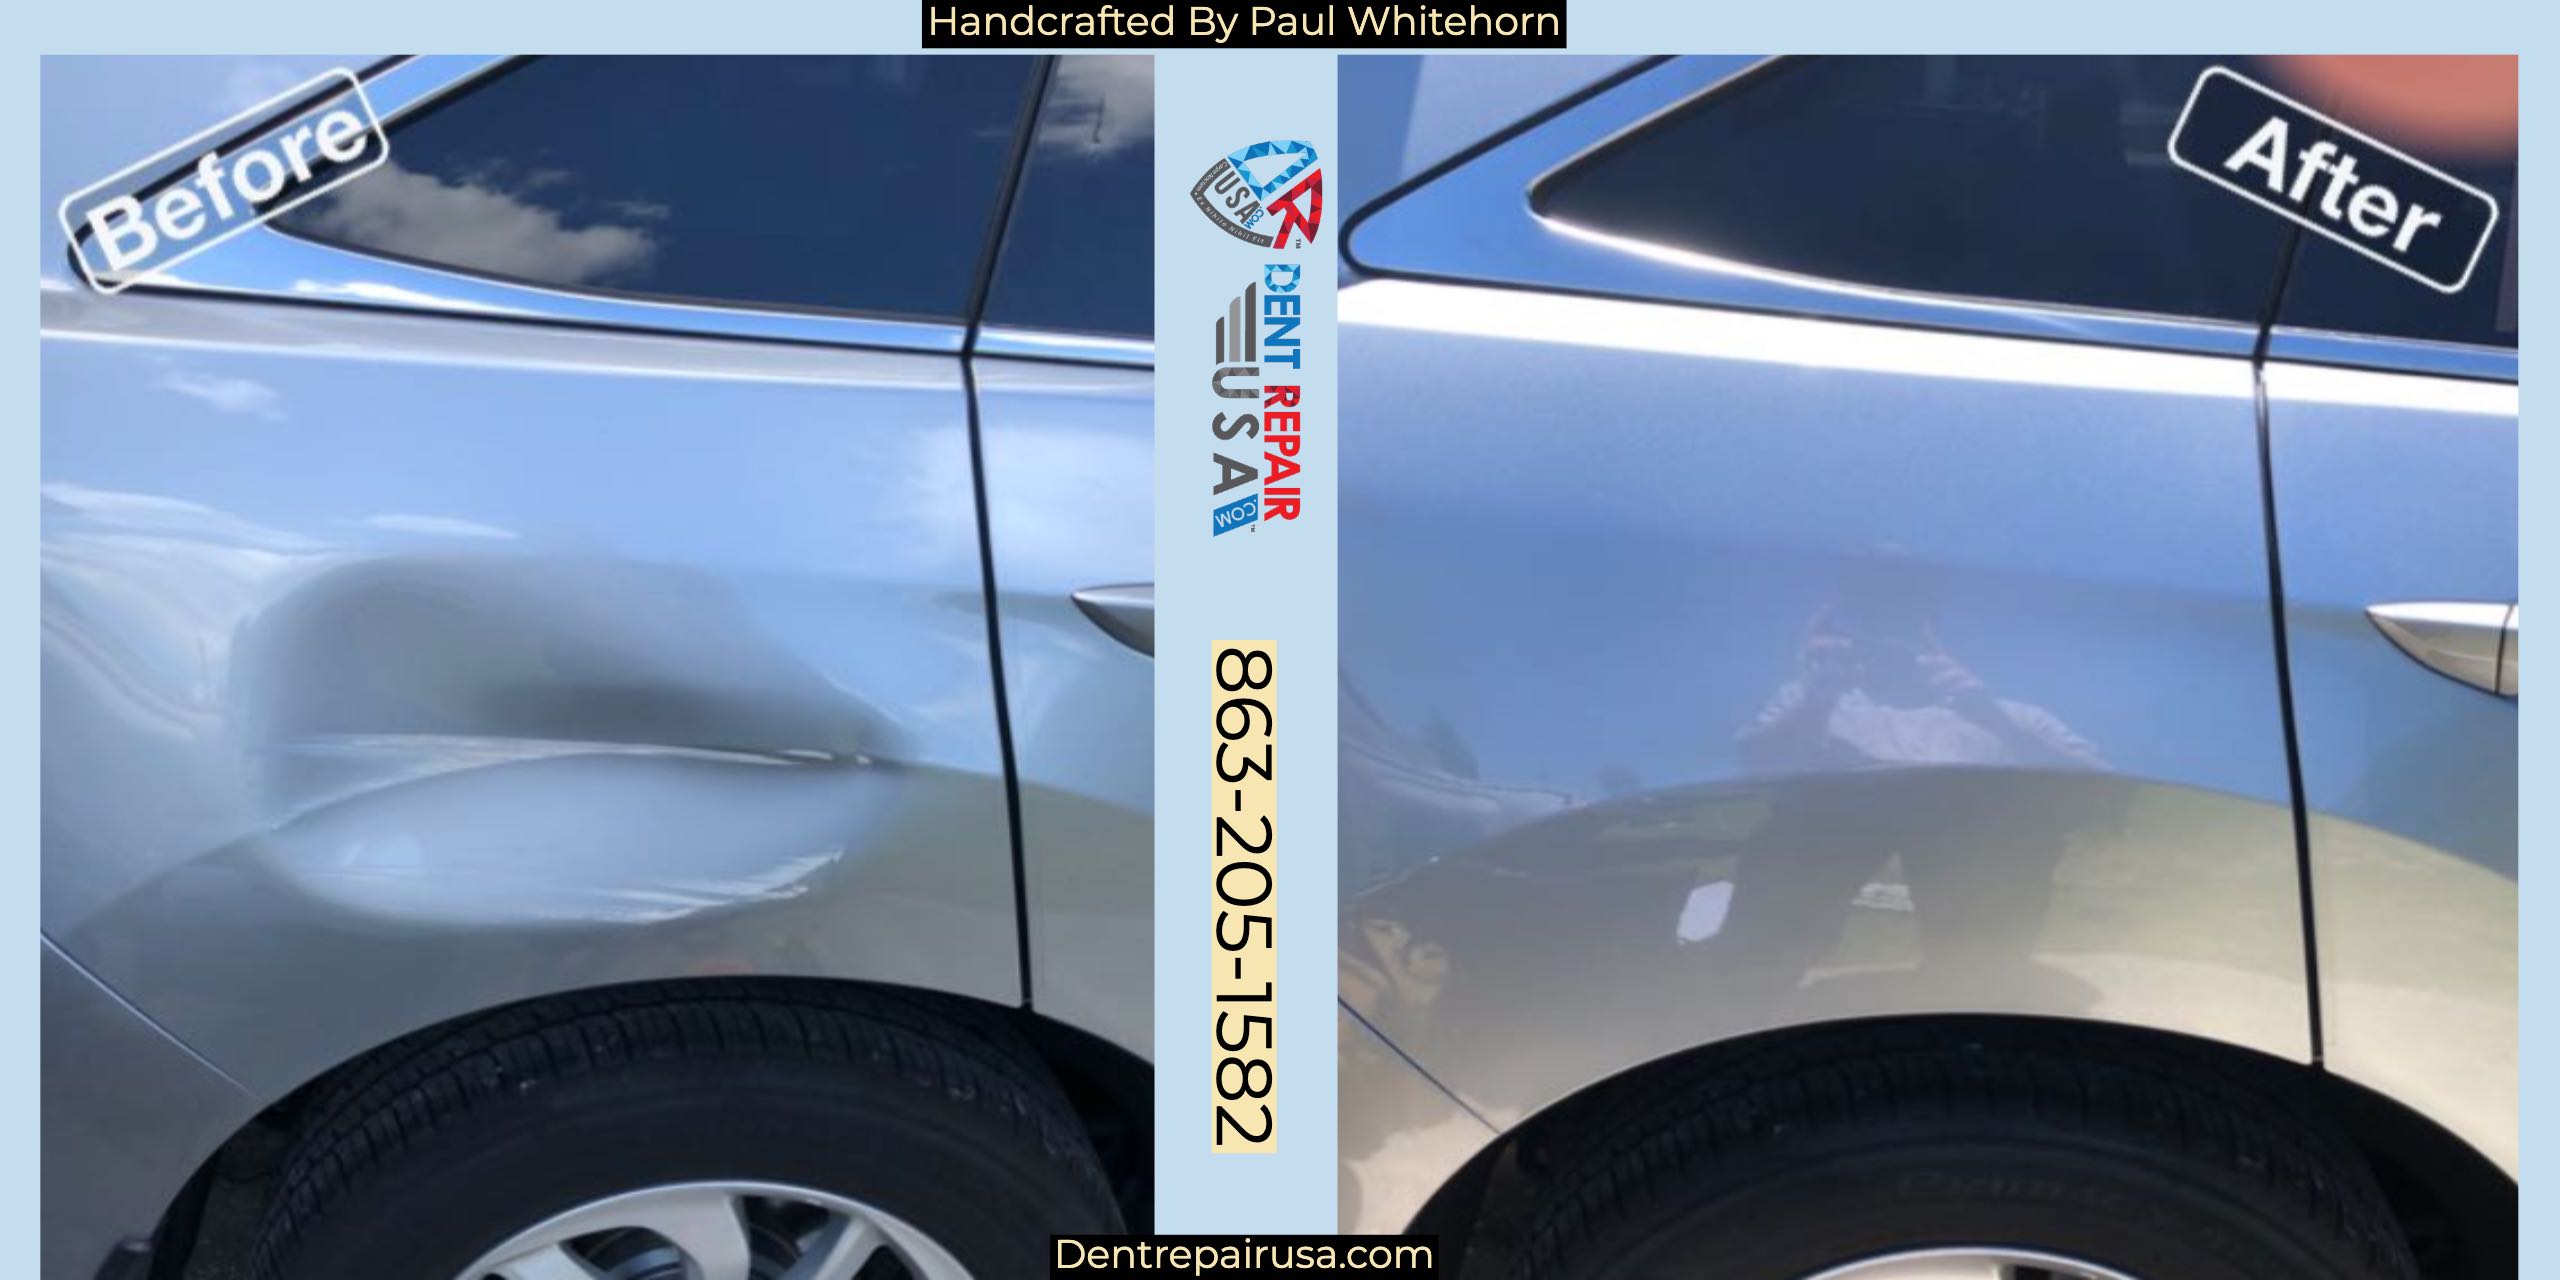  How To Become A Paintless Dent Repair Technician  